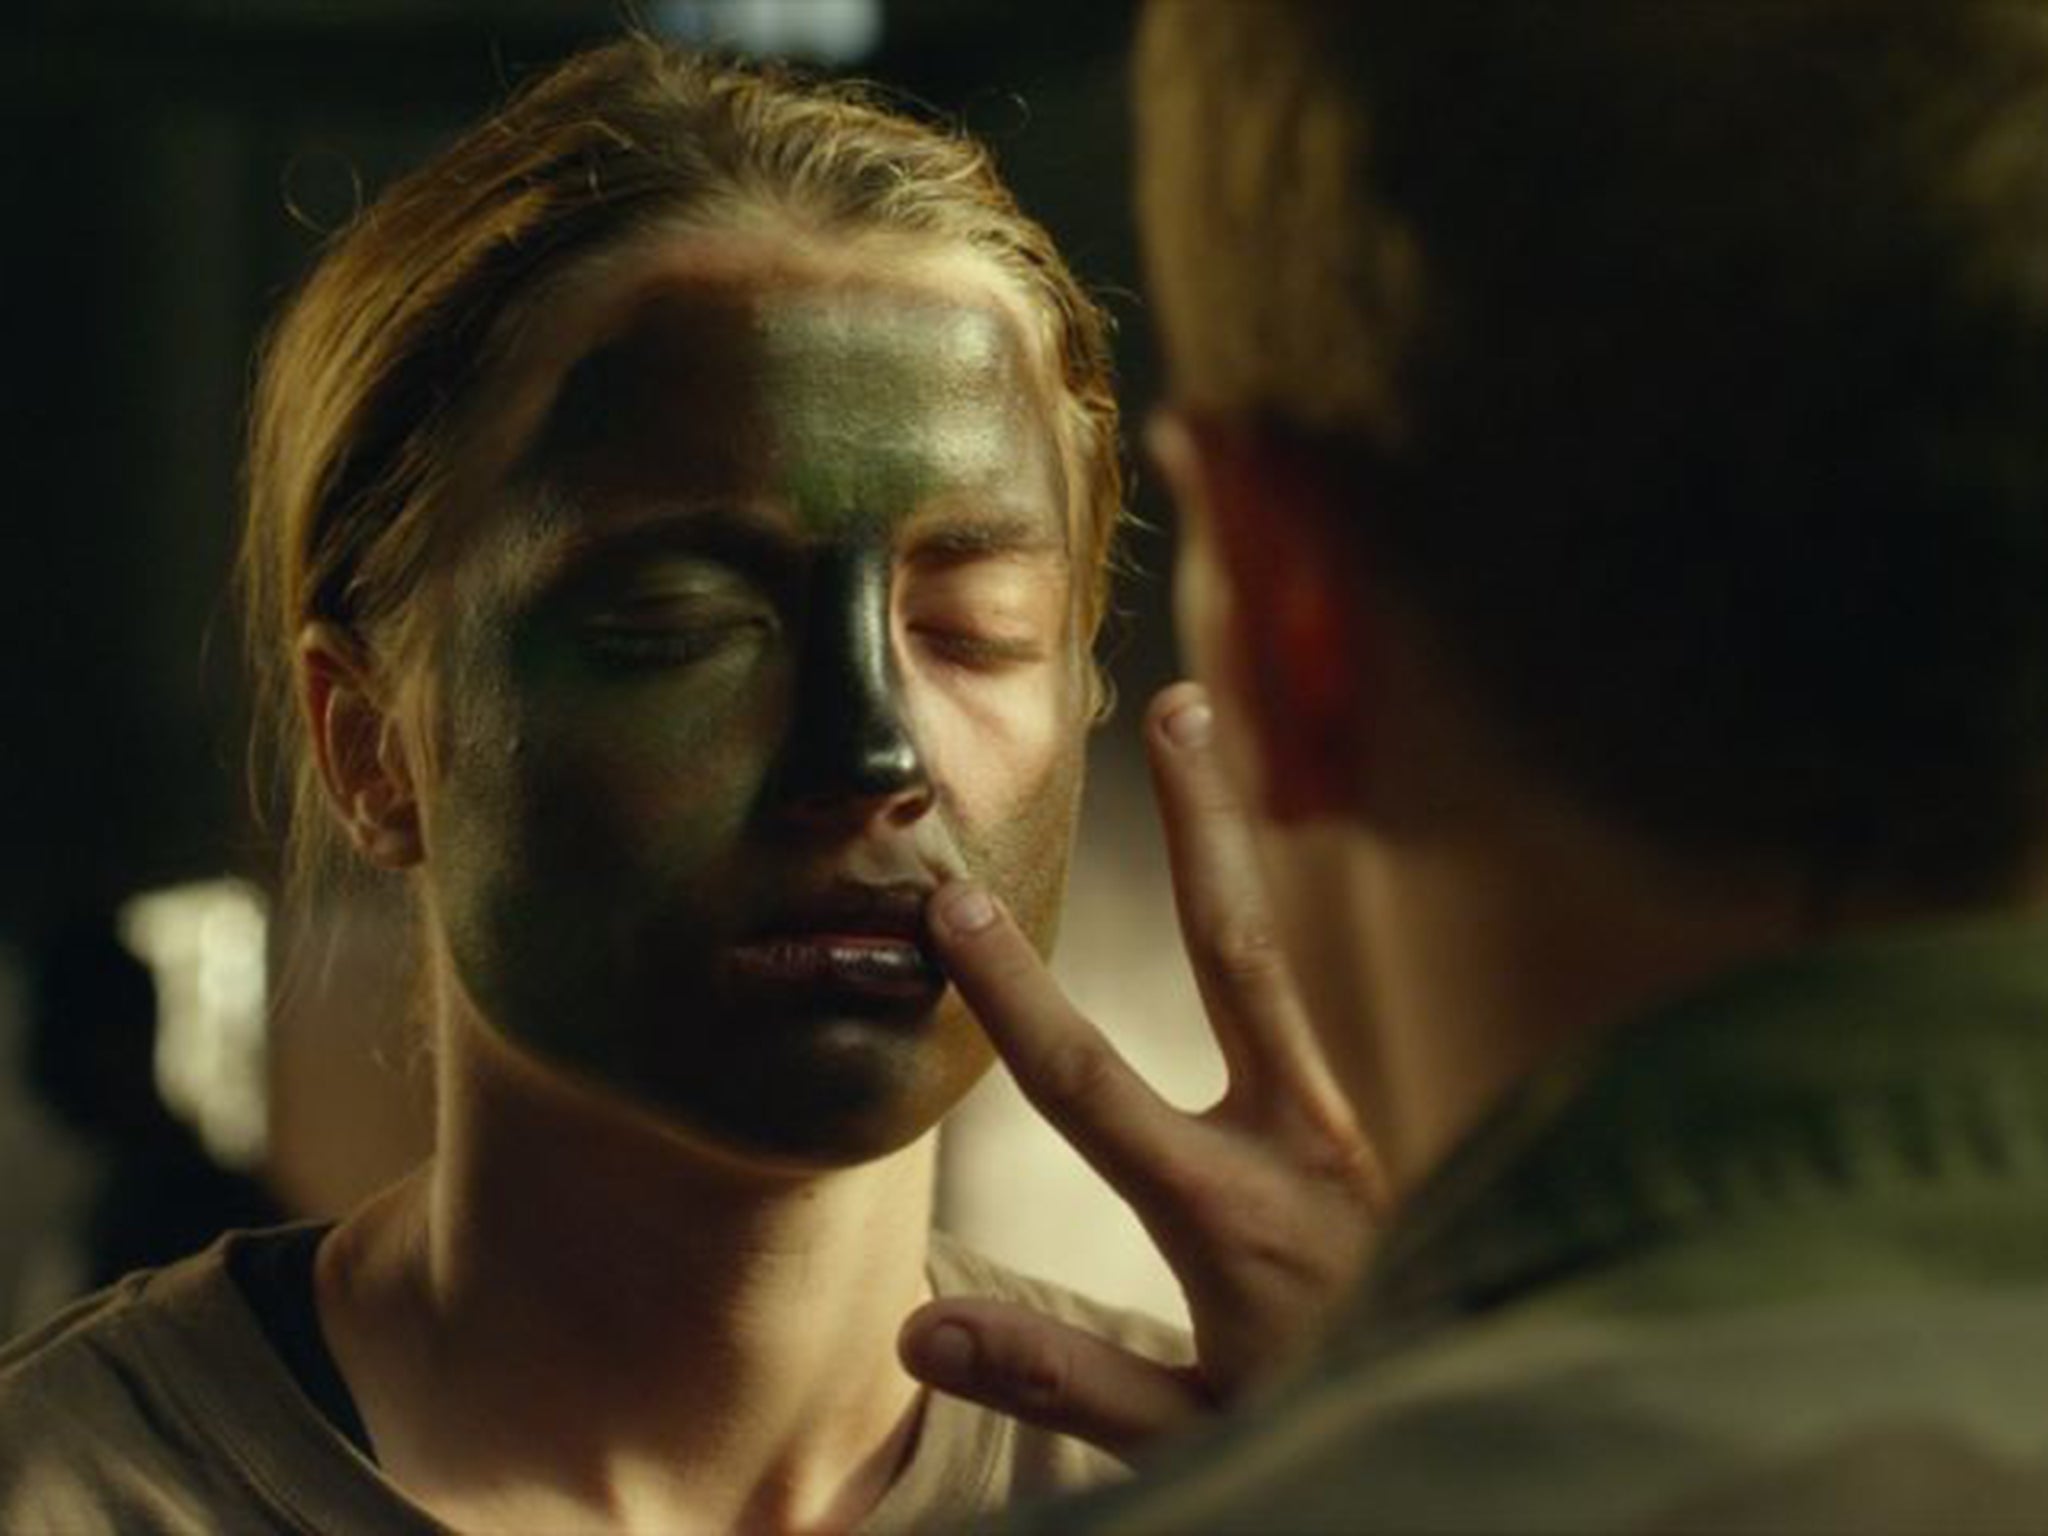 Adèle Haenel in Thomas Cailley’s offbeat comedy-drama ‘Les Combattants’